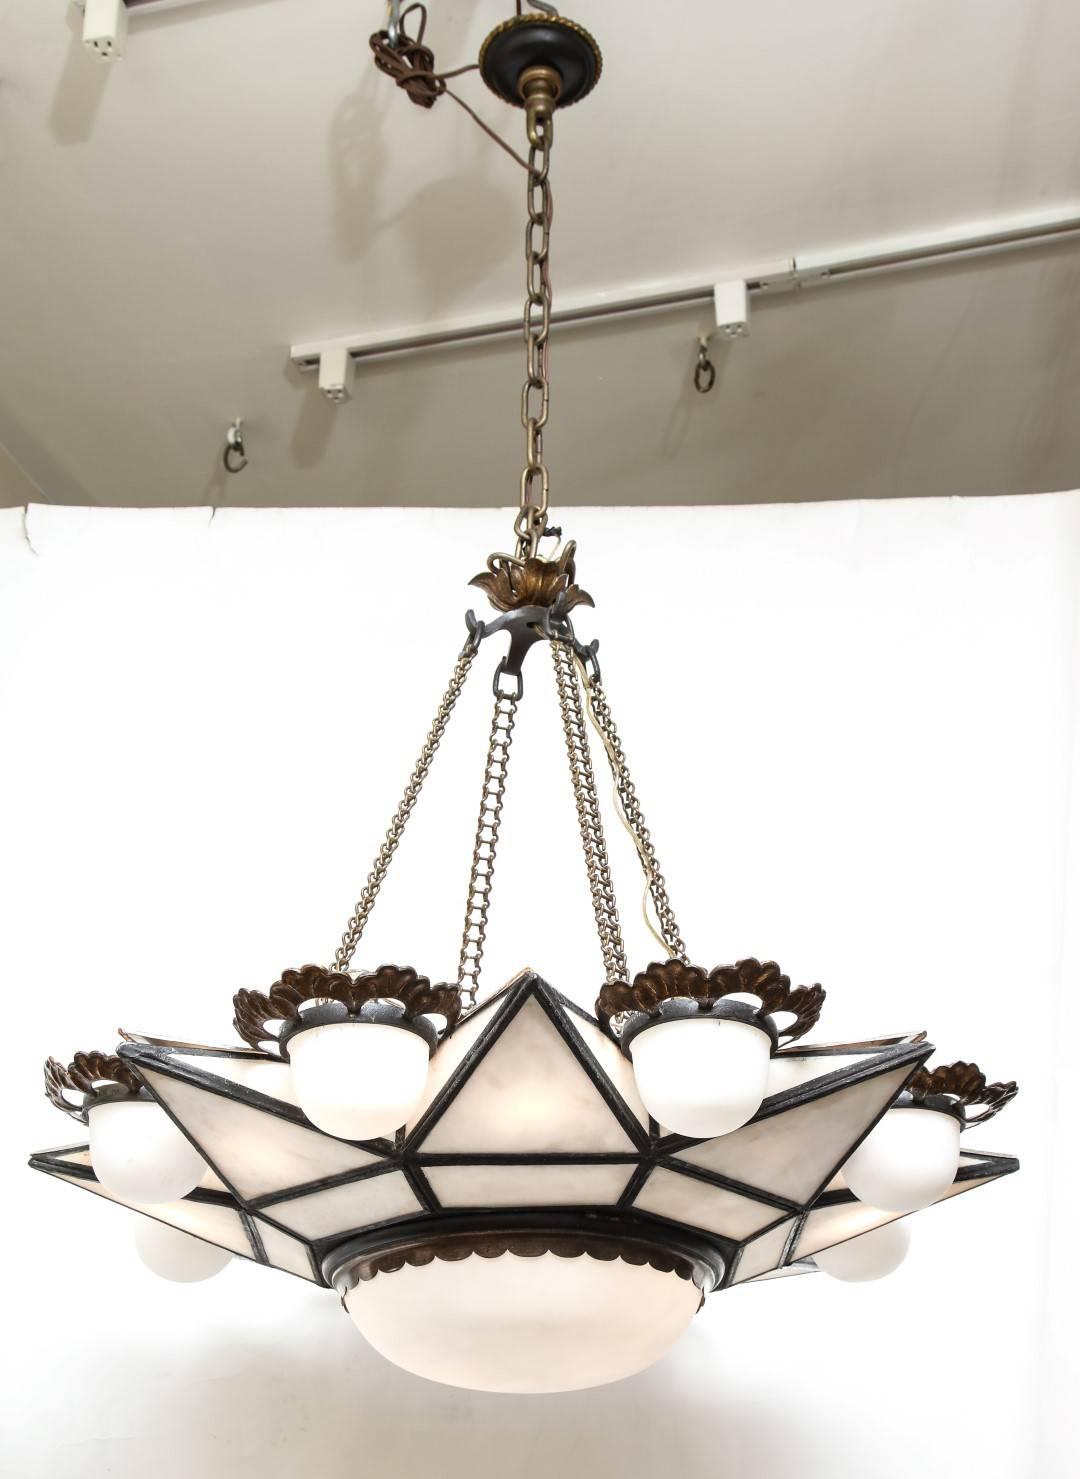 A bronze-mounted Moorish style ceiling fixture
Documented E.F Caldwell & Co, New York
Quantity of three available.

Drop as shown- 25